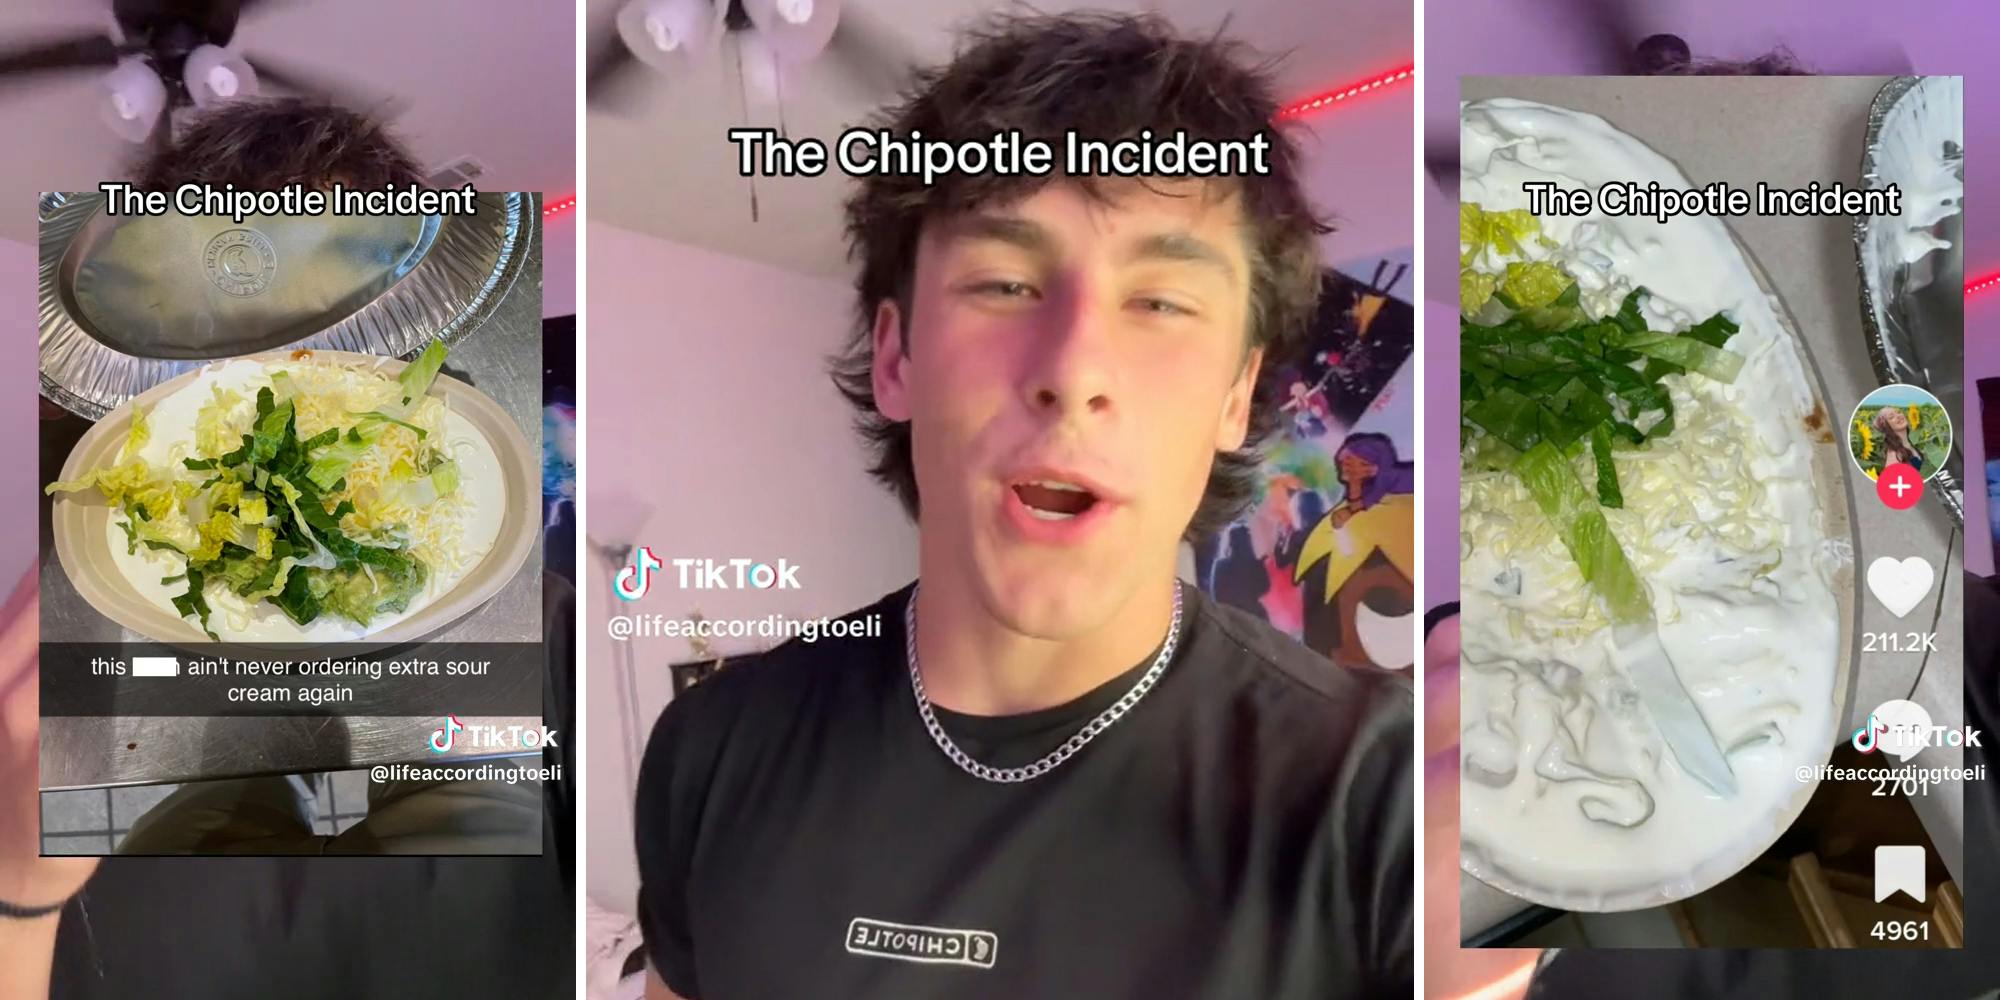 ‘You kinda ate him up’: Ex-Chipotle worker says he lost job for making revenge bowl for ‘massive’ 10pm order. Then the customer responds